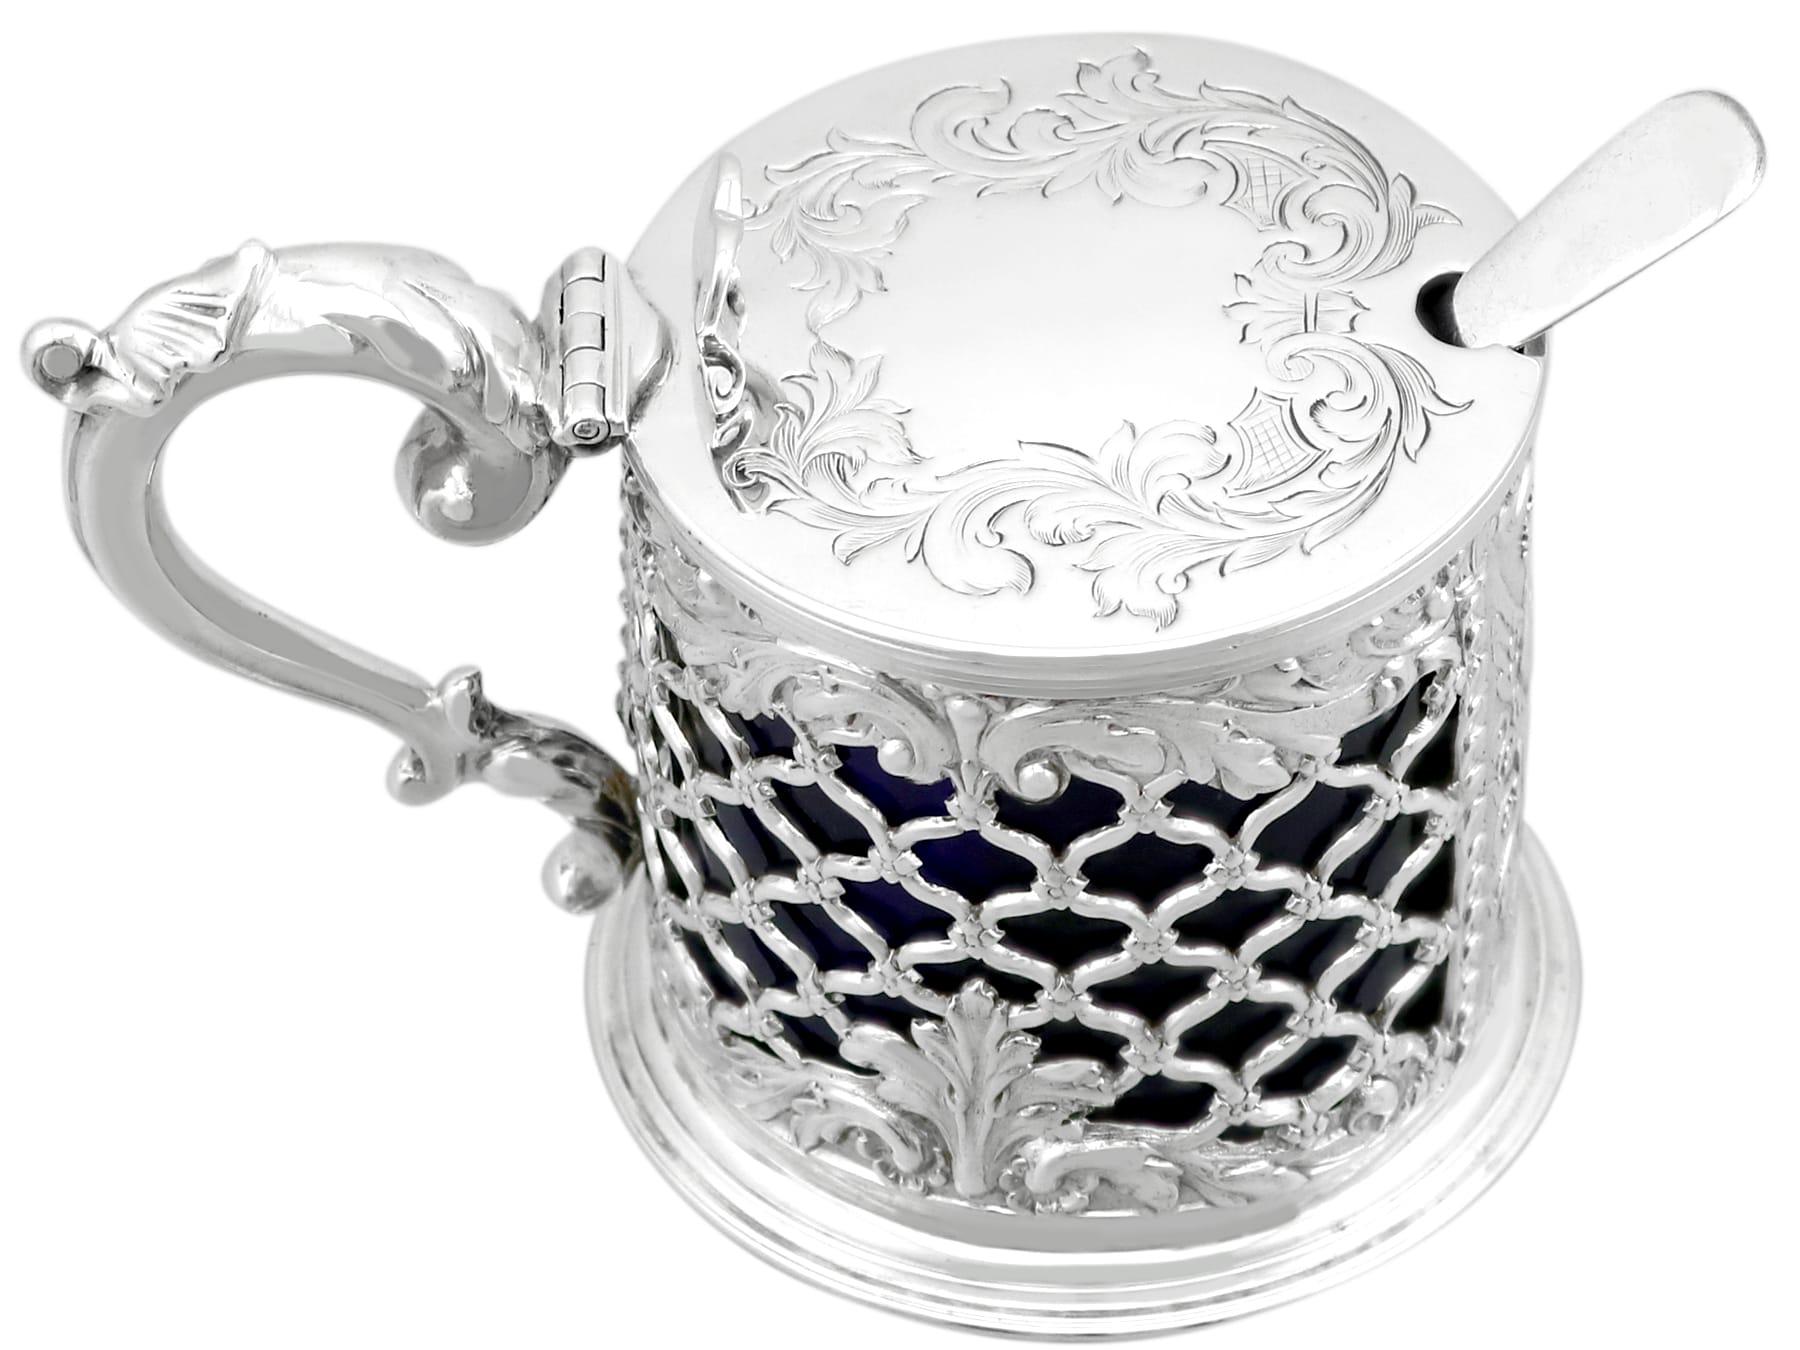 Antique Victorian Sterling Silver Mustard Pot (1841) For Sale 1